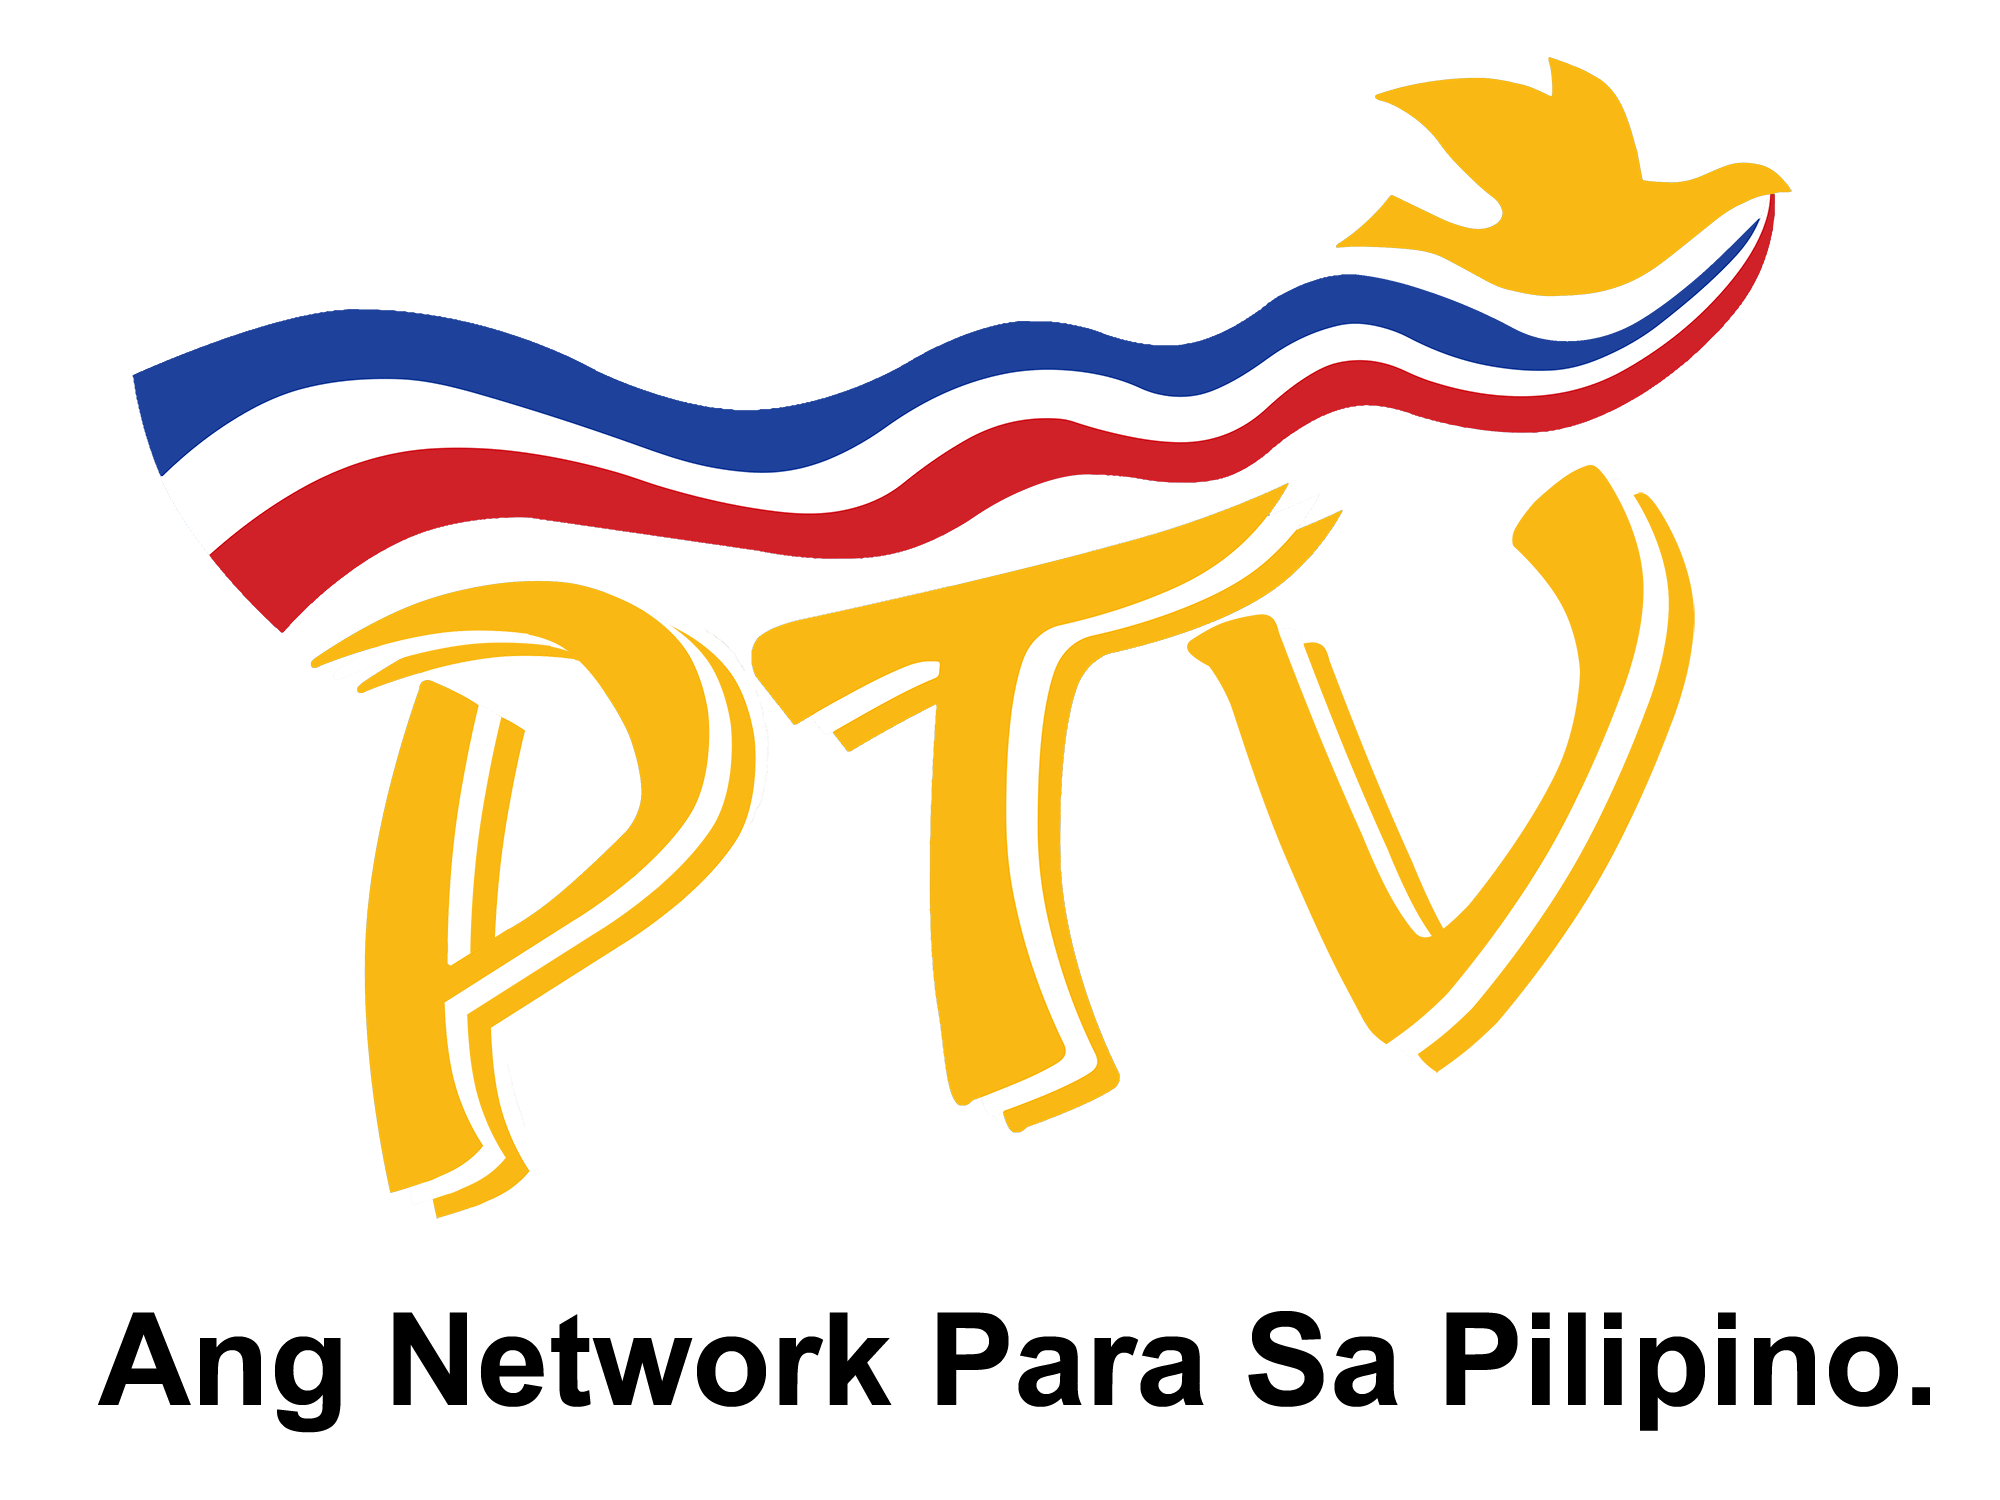 PTV Logo - People's Television Network